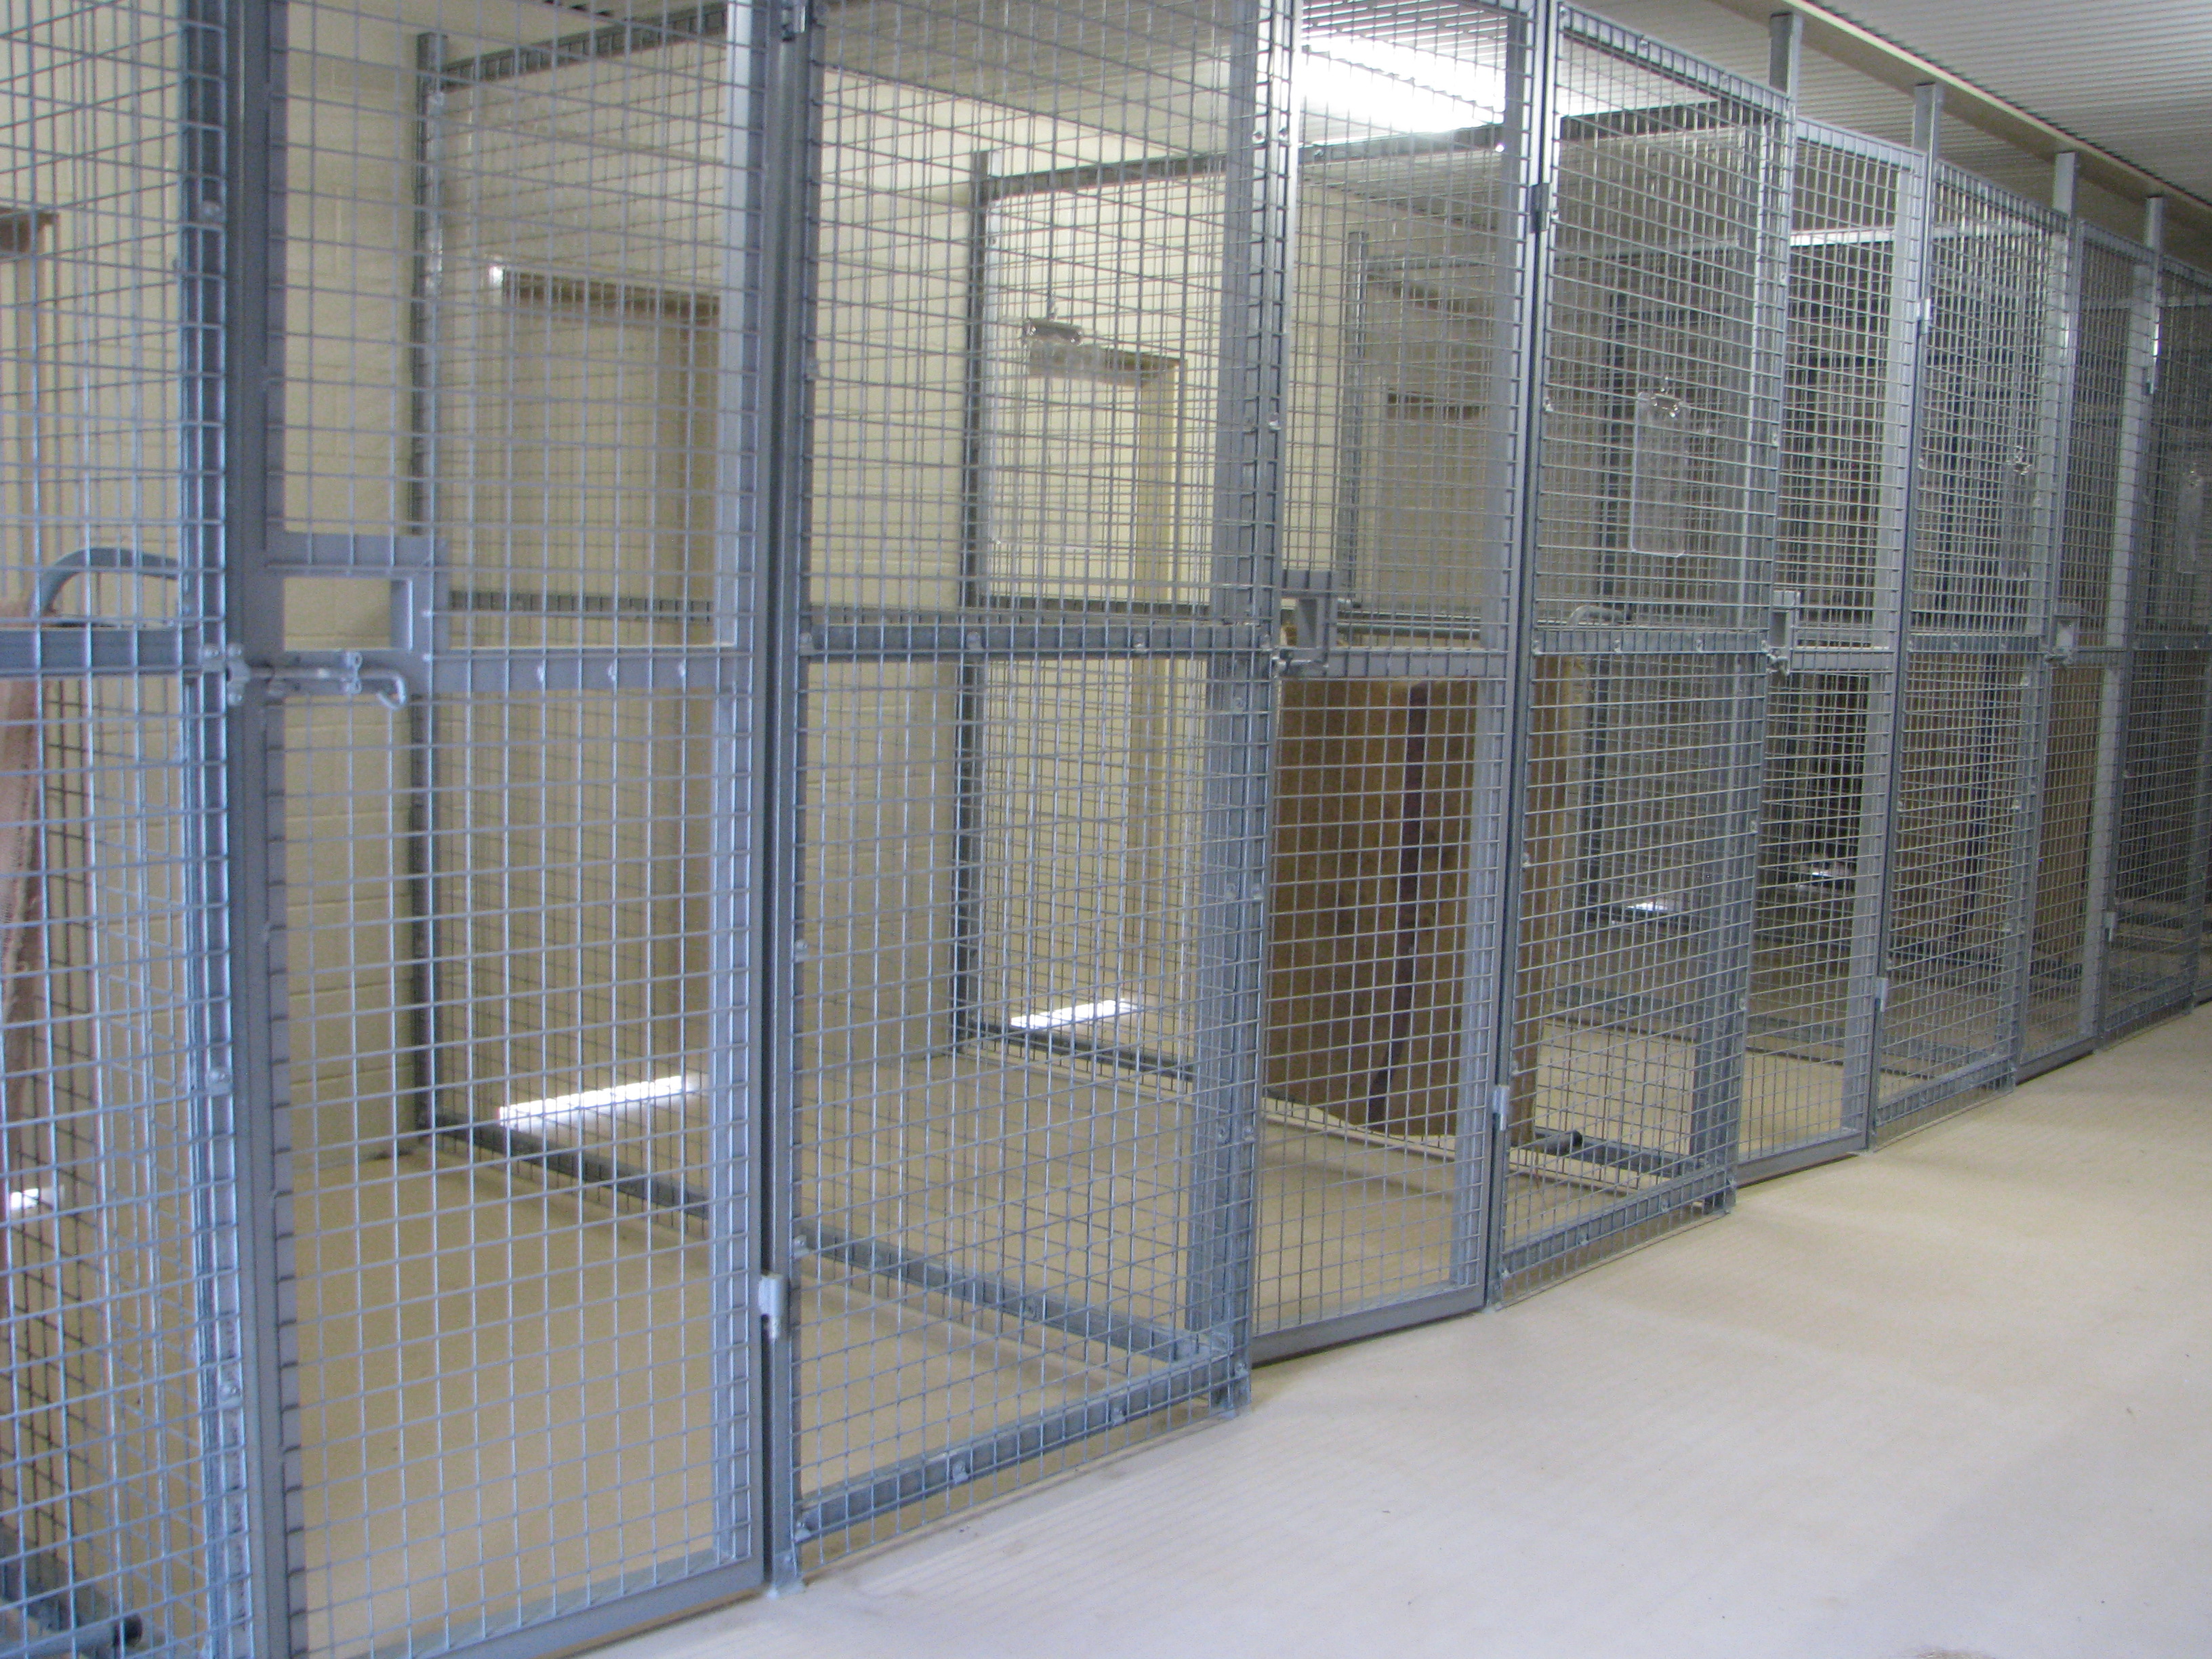 The internal kennels where our guests sleep are extremely large